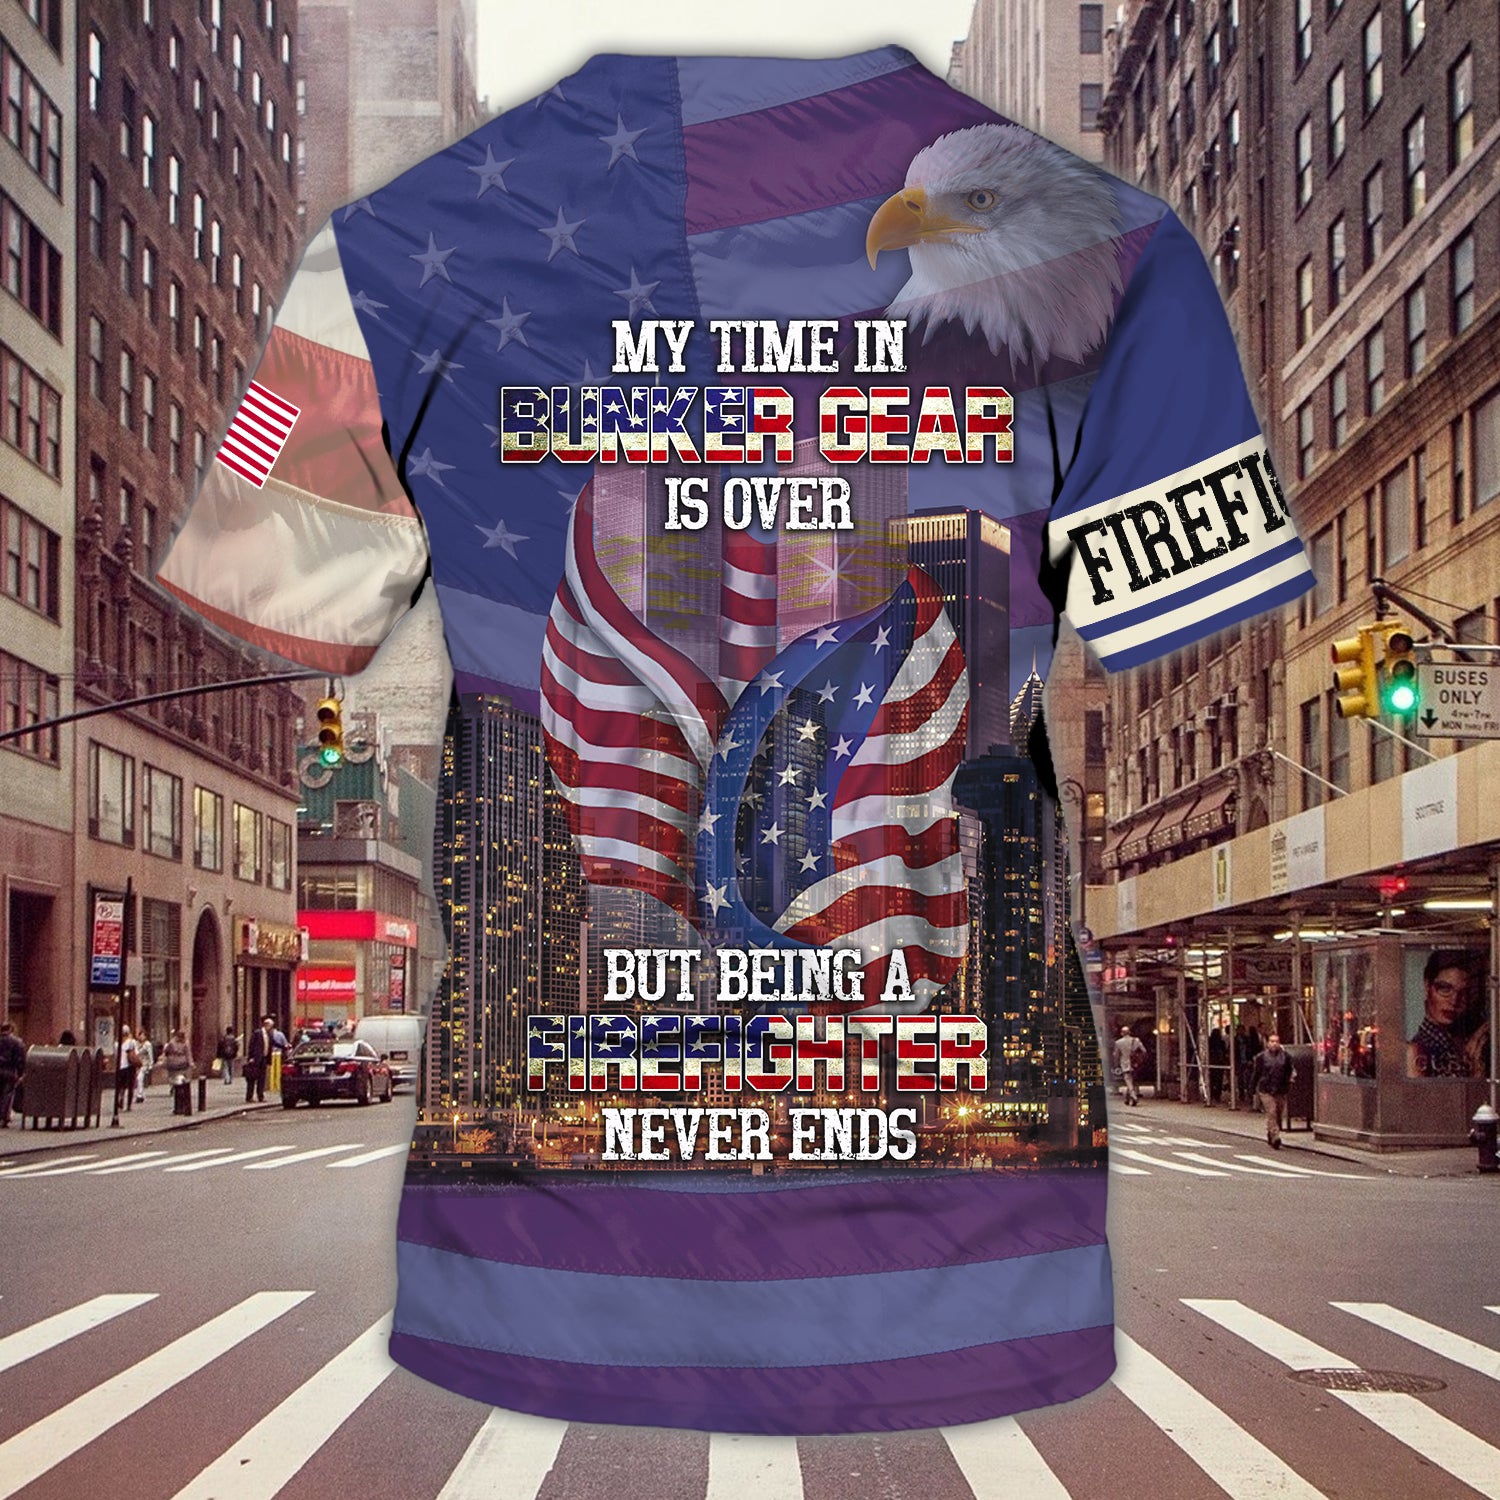 Never Forget 911 - Firefighter- Personalized Tshirt 28- Lta98